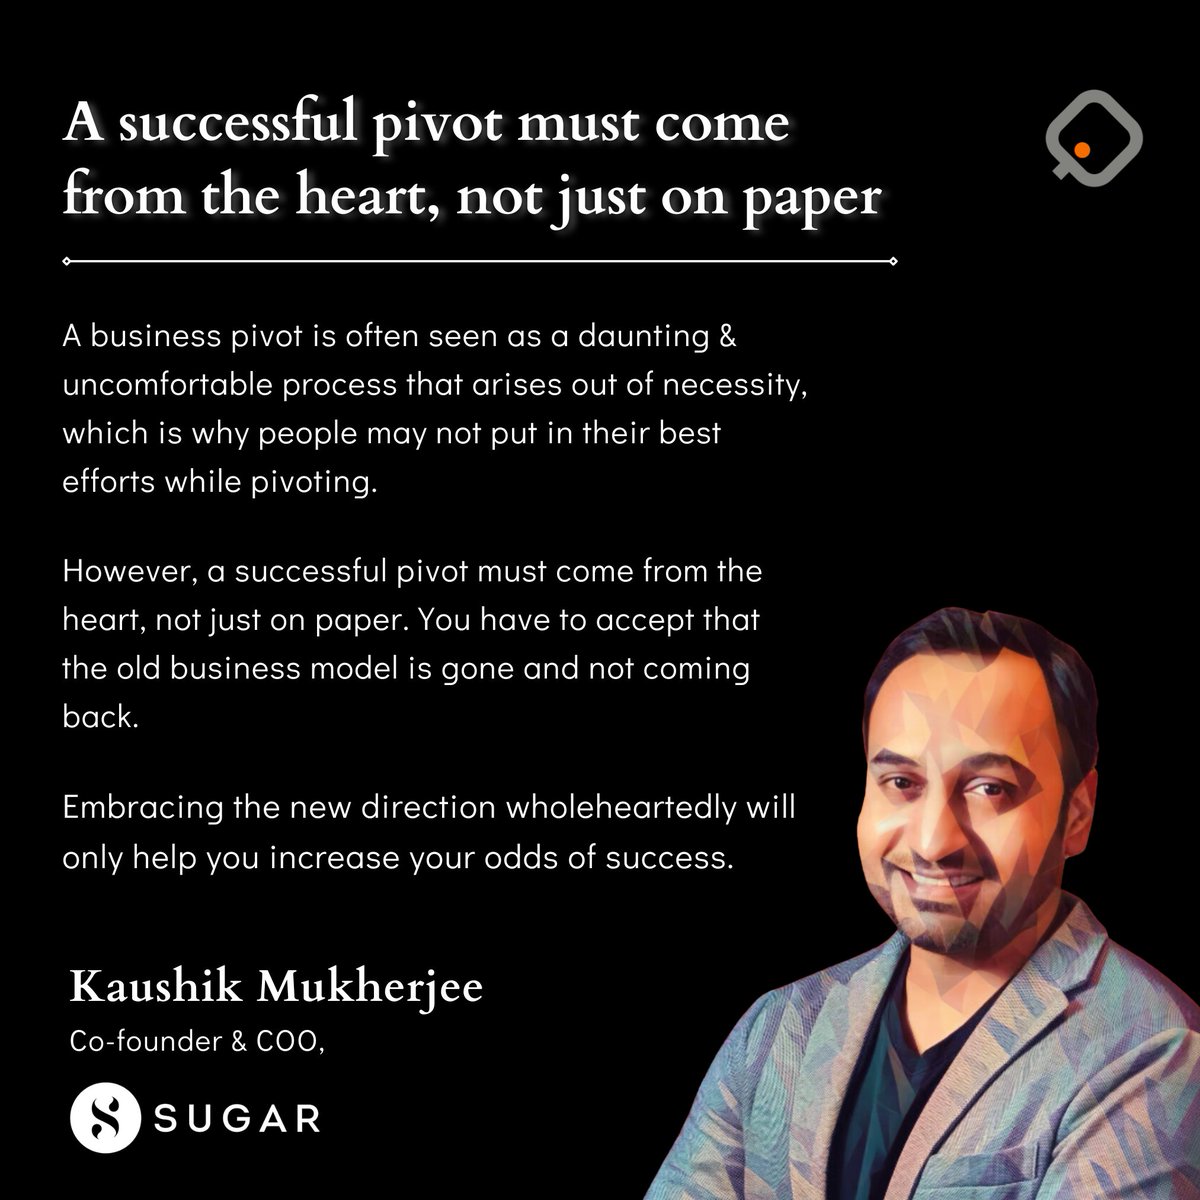 How do you increase your odds of success during tough business pivots? @kaushikmkj, co-founder and COO of @trySUGAR, shares his advice for entrepreneurs⬇️